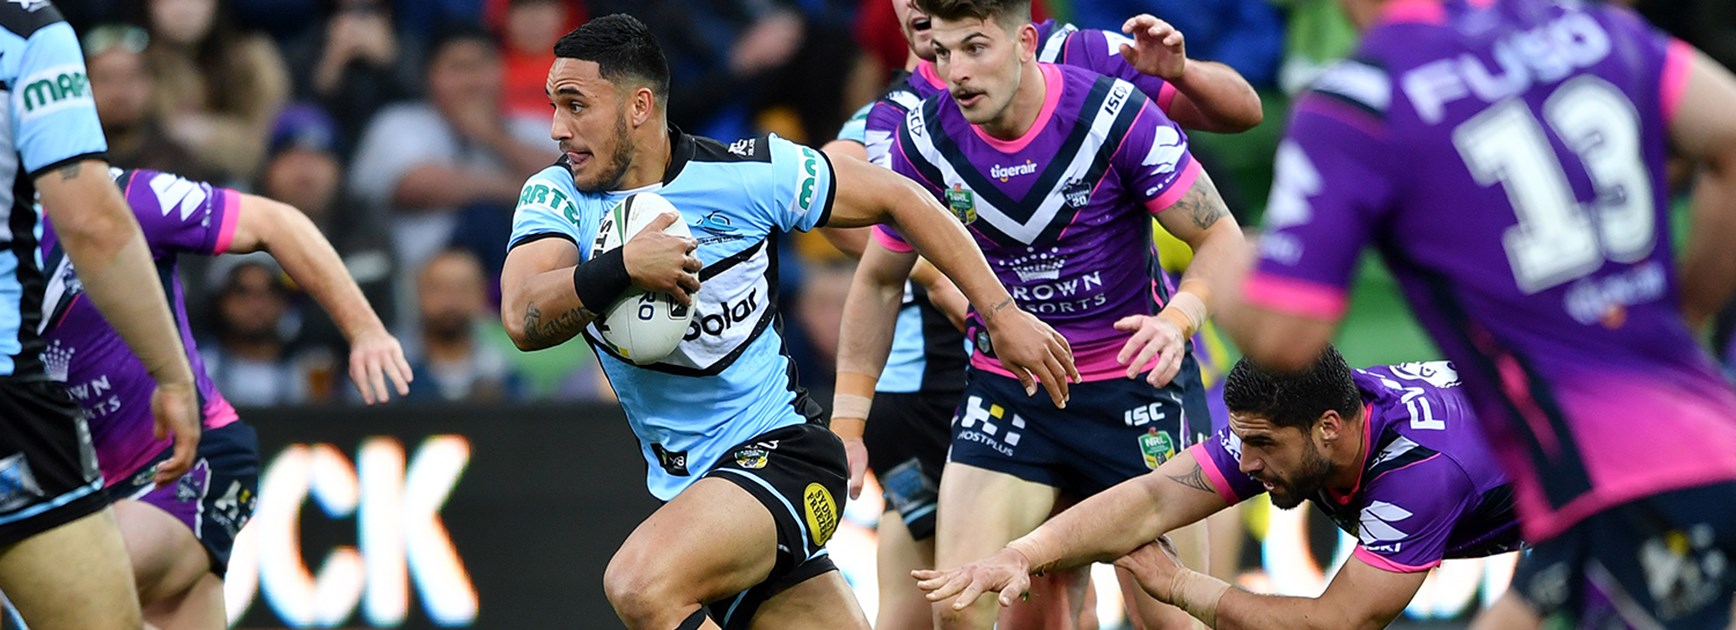 Sharks score crucial win over Storm